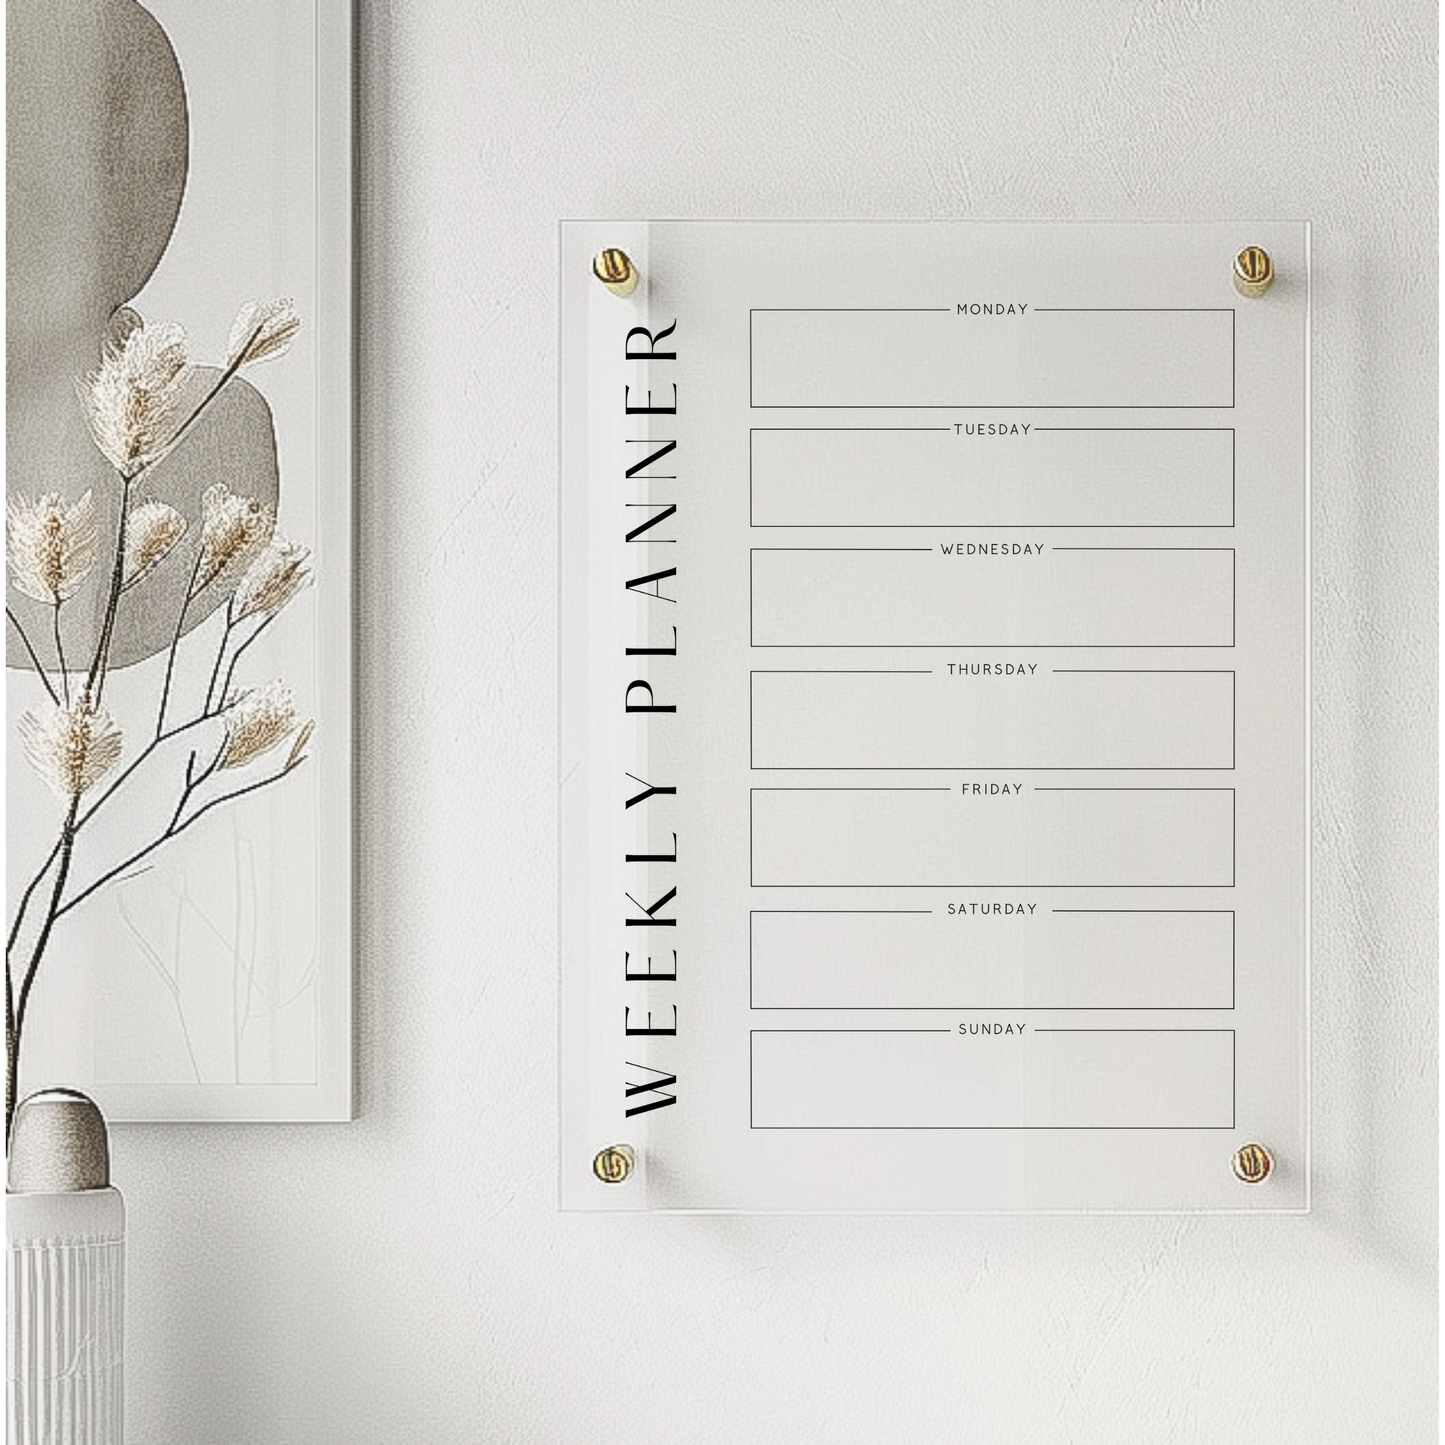 Custom A4/A3 Clear Acrylic Wall Planner with Modern Design and Various Fixture Options